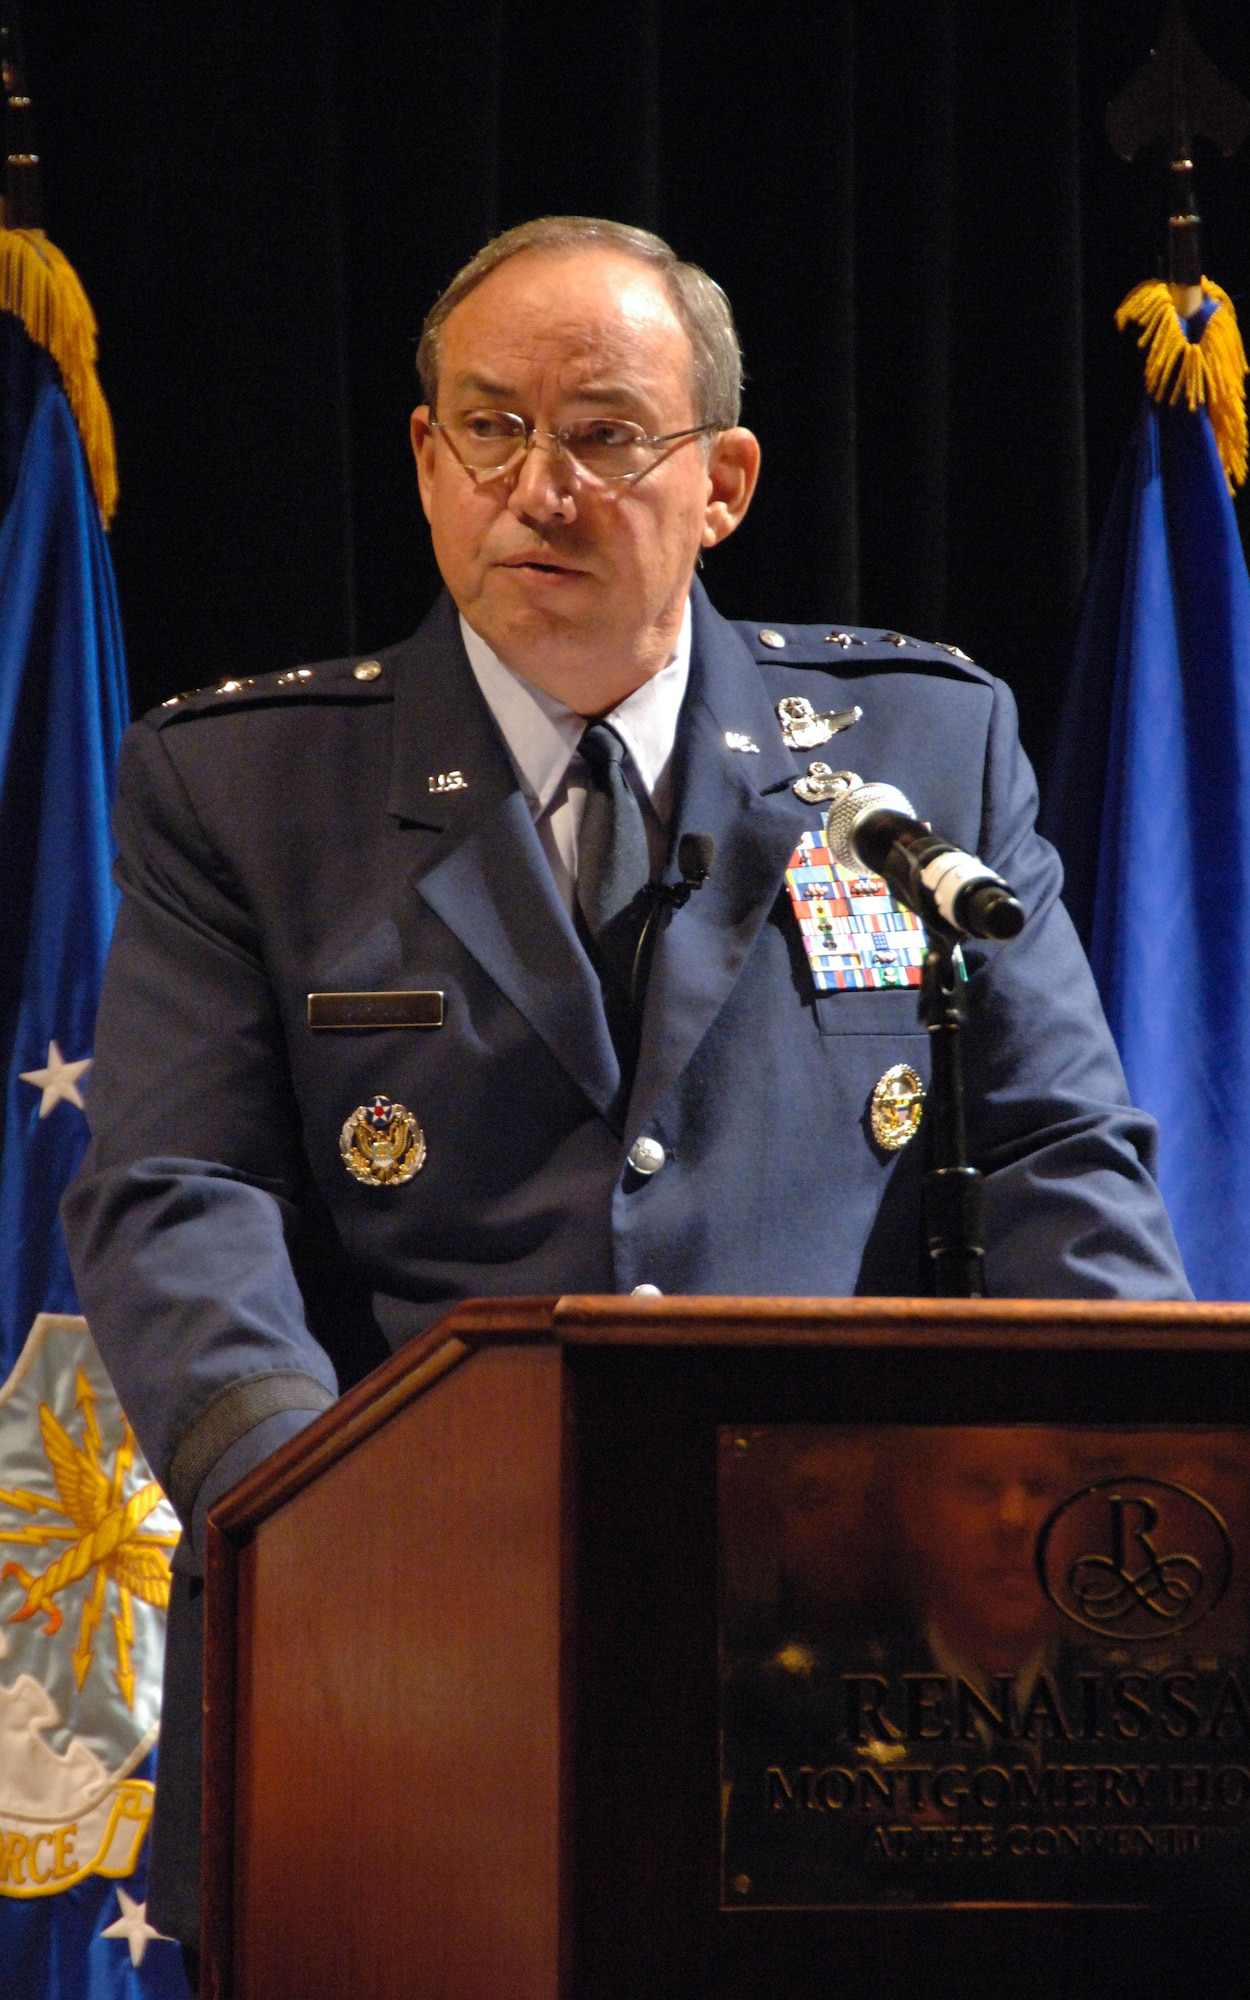 Lt. Gen. David A. Deptula, the Deputy Chief of Staff for Intelligence, Surveillance and Reconnaissance, at Headquarters U.S. Air Force, Washington, D.C., spoke to more than 140 Air Force ROTC detachment commanders at the 2009 AFROTC Commander’s Conference in Montgomery, Oct. 22. General Deptula is an AFROTC graduate and stressed the importance of instilling an air-mindedness mind-set in the future leaders of the Air Force. (U.S. Air Force photo/Melanie Rodgers Cox) 
